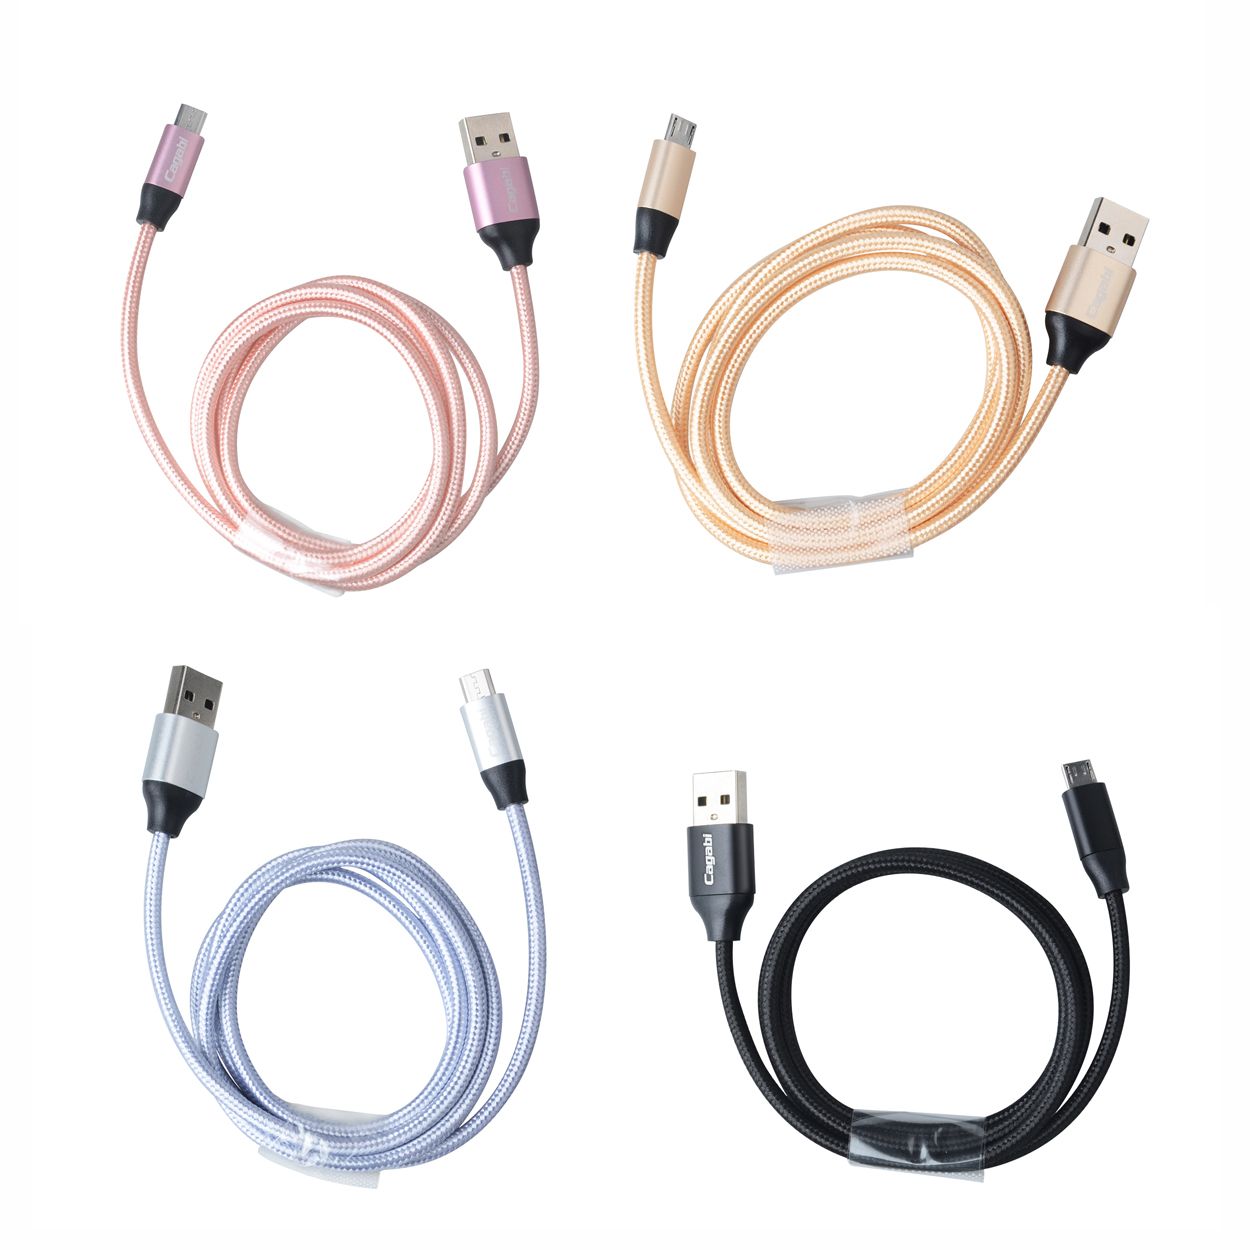 Bakeey-Micro-USB-Denim-Braided-Data-Cable-For-HUAWEI-P30-Pocophone-S9-S10-S10---Black-2M-Type-C-1642862